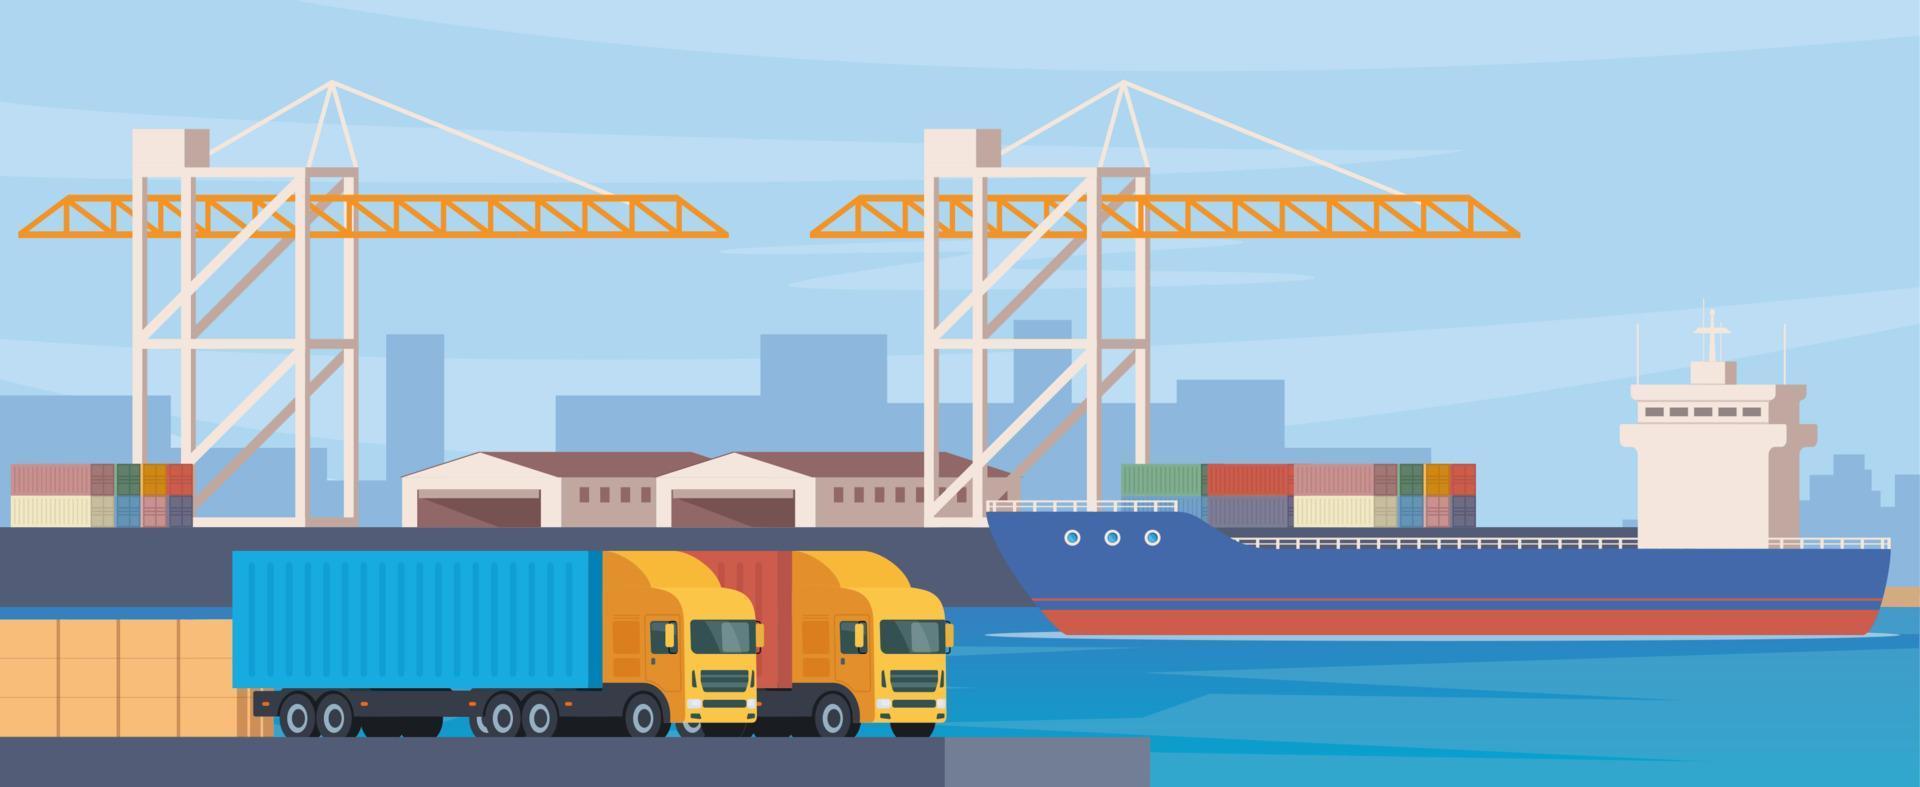 Cargo seaport with cranes, container ship, containers and warehouses. Cargo Trucks in foreground. Commercial transport. Logistics. International transportation and trade. Vector illustration.